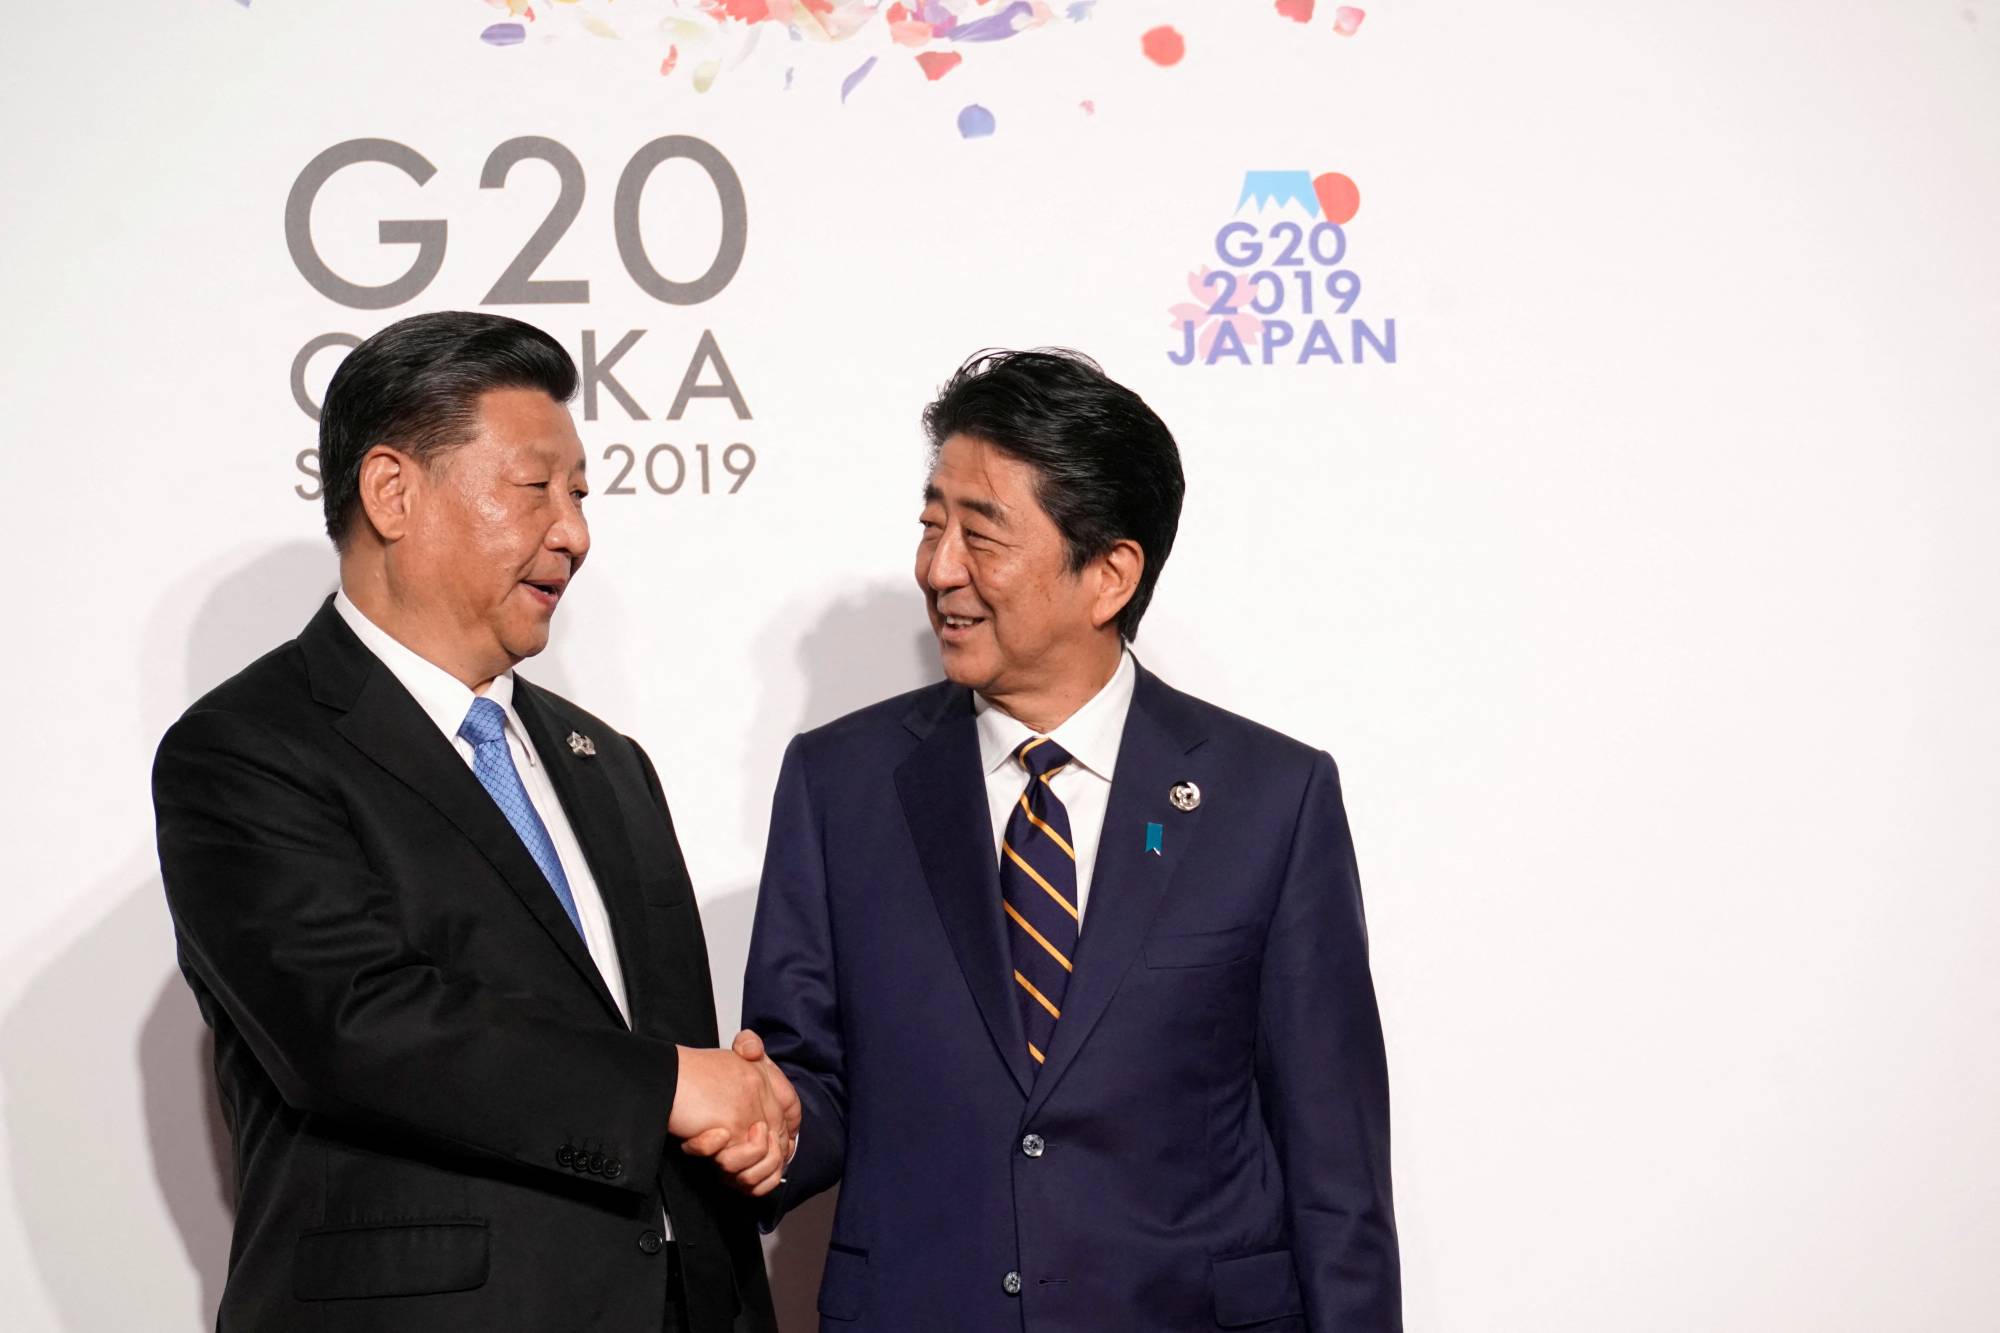 Abe greets Chinese President Xi Jinping at the Group of 20 leaders summit in Osaka in June 2019. | REUTERS